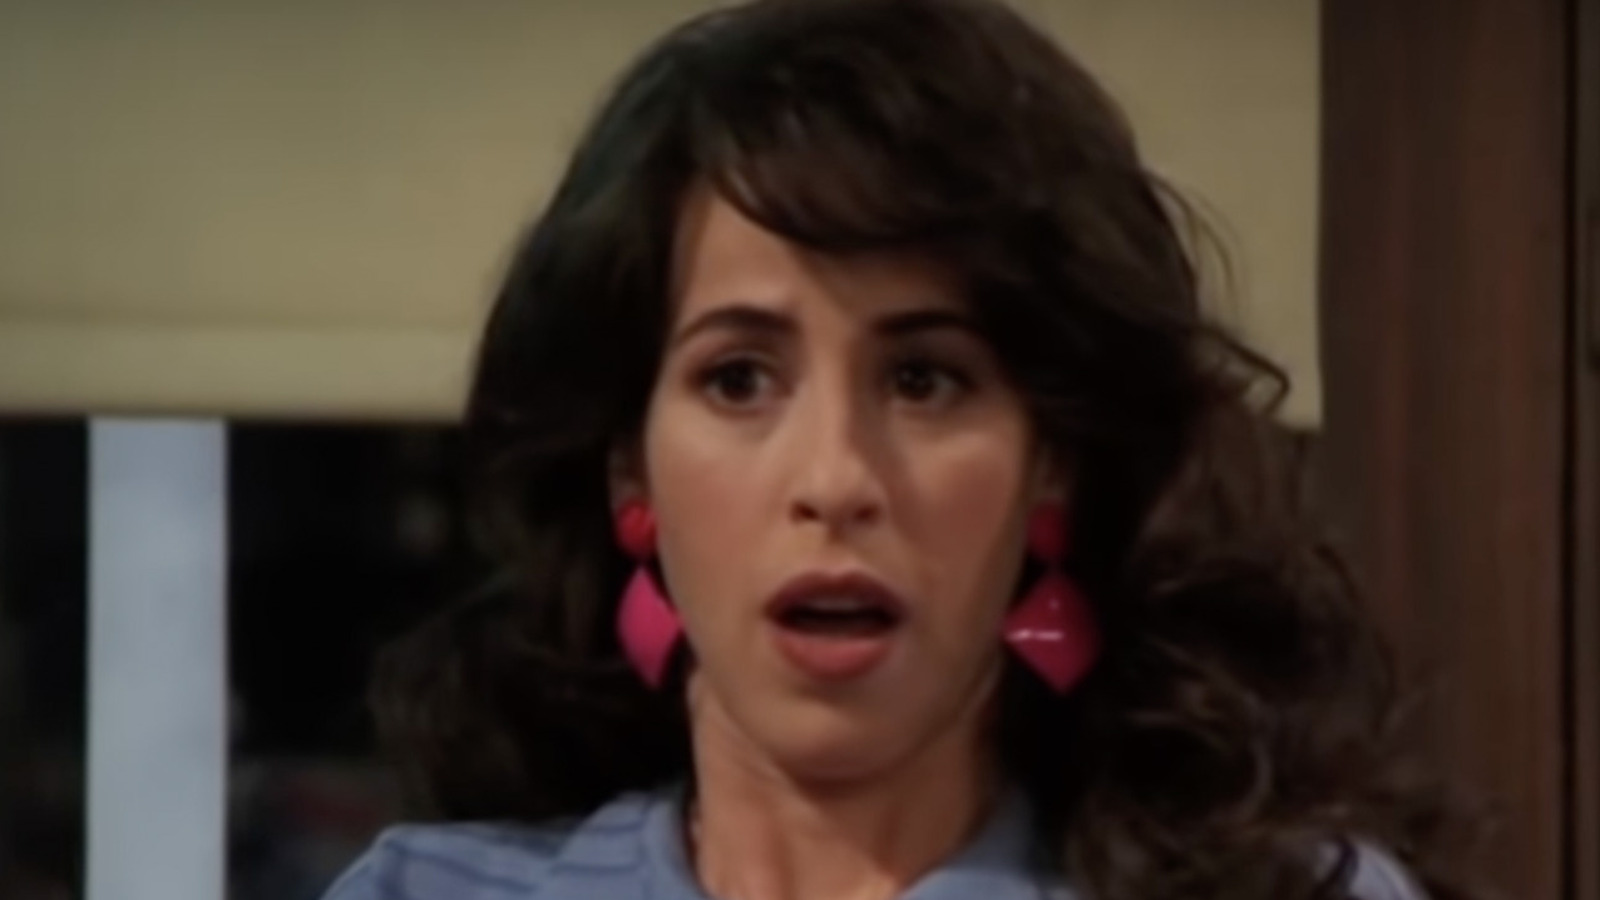 How Many Episodes Of Friends Did Maggie Wheeler Star In?